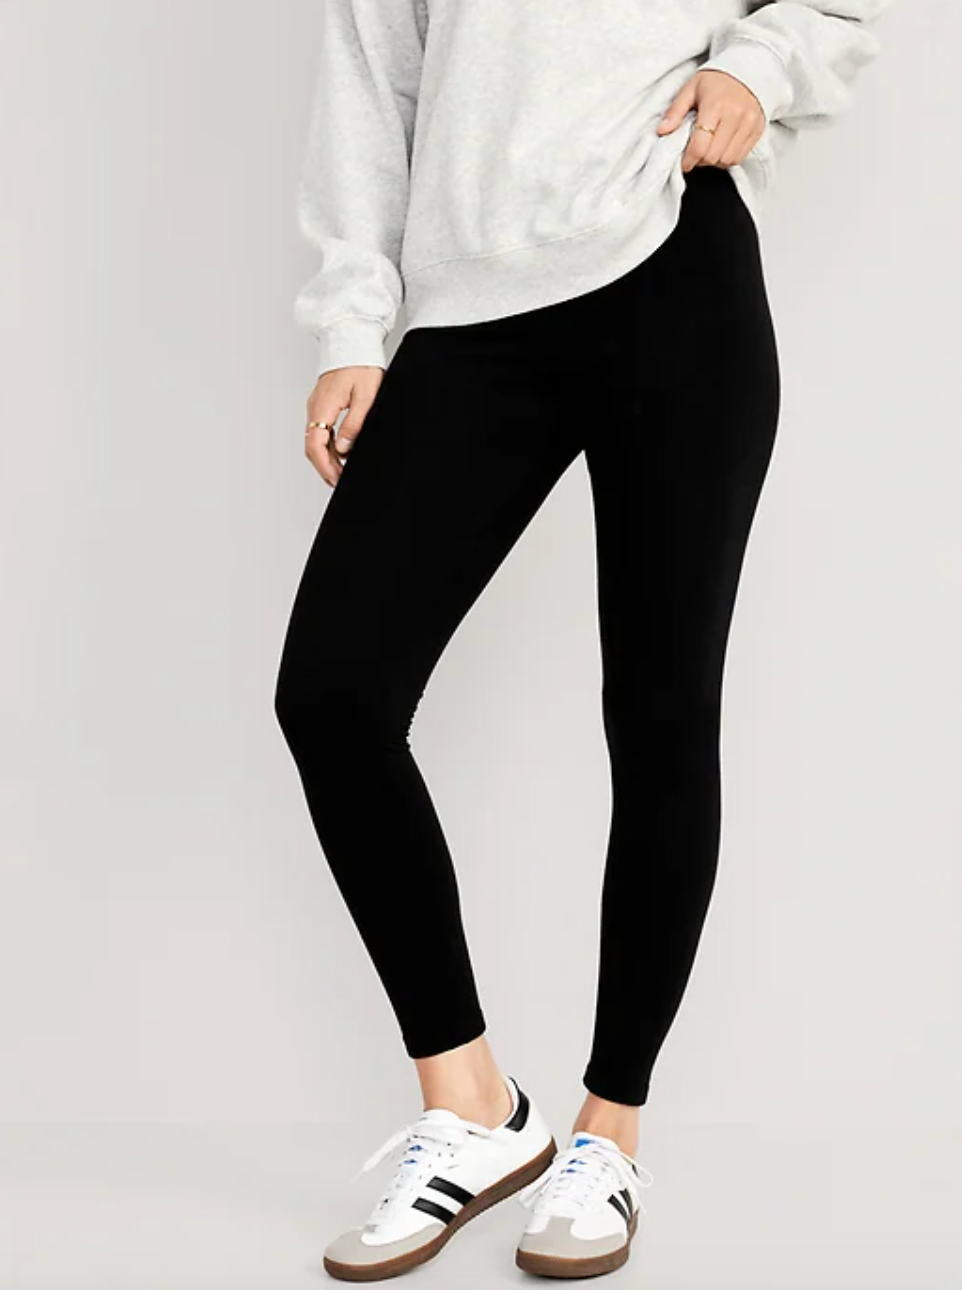 Anyone knows from where can I buy Fleece lined tights? (i'm in